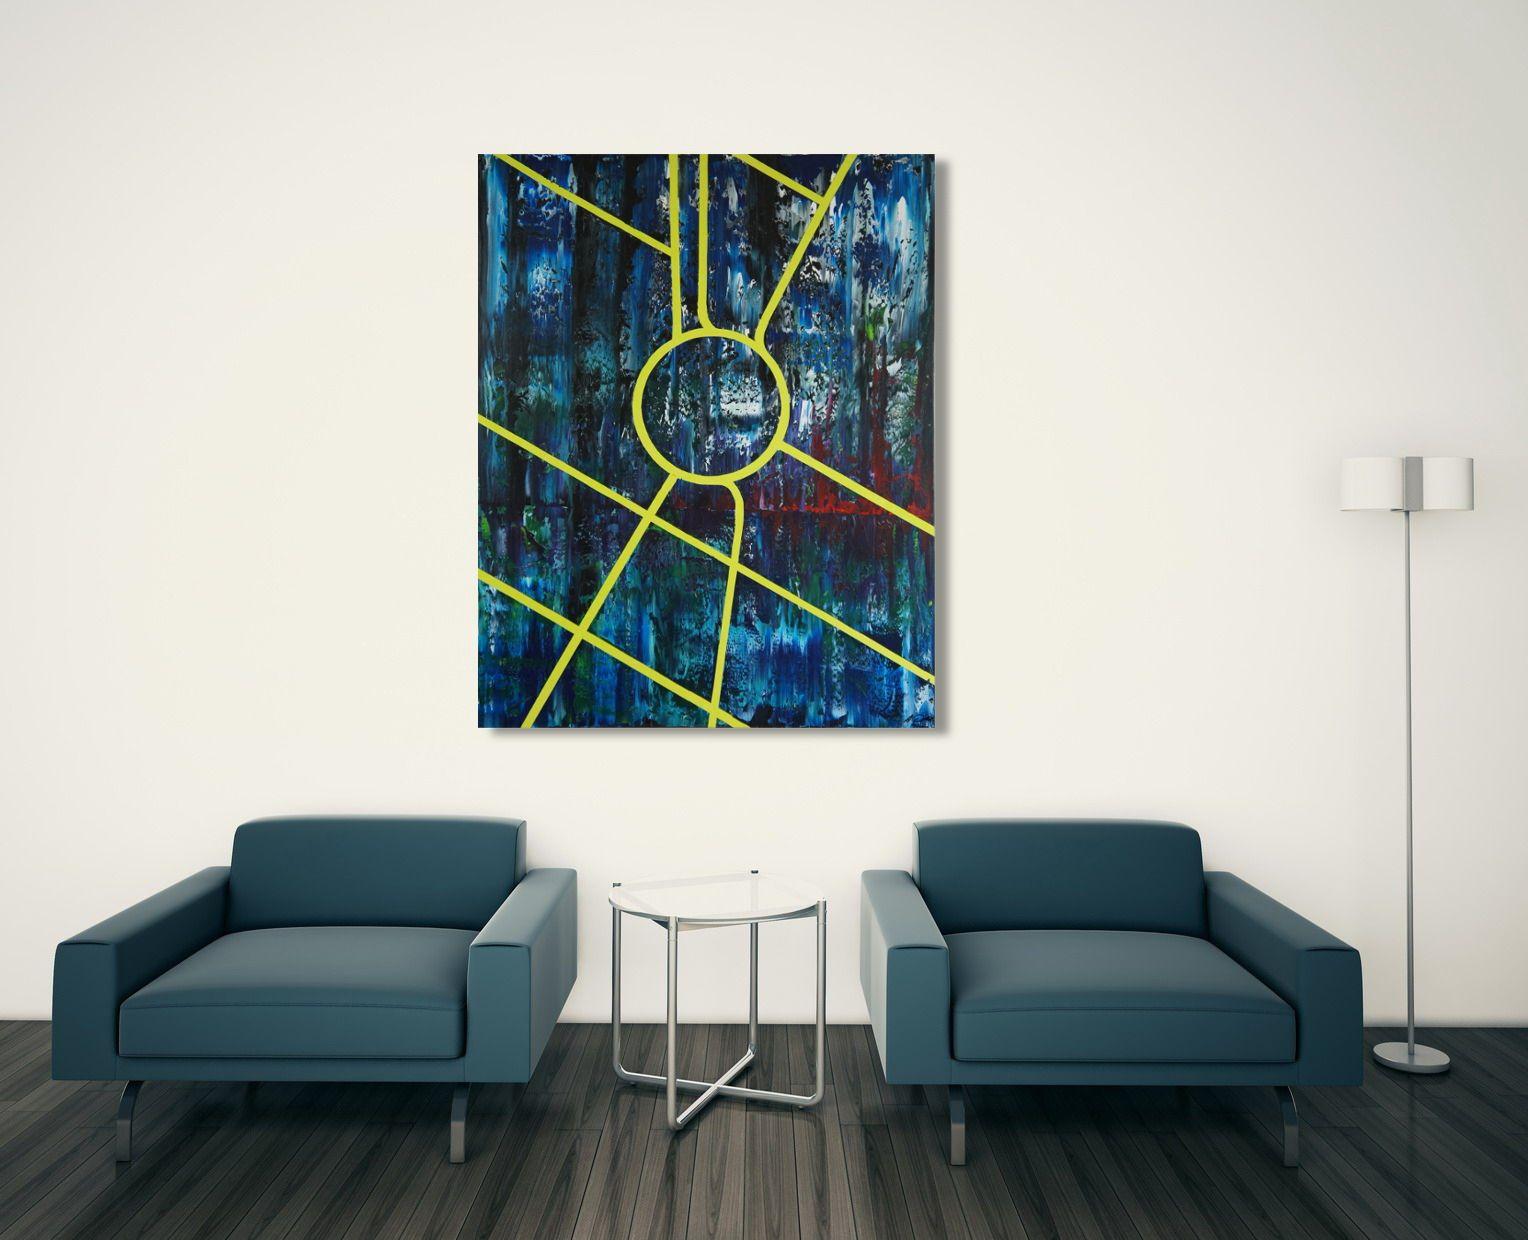 One from the map series, showing a street map of Manhattan, New York City, Columbus Circle being the center point. From there, Broadway runs vertically from north to south while avenues and streets run diagonally.  Textured pallet-knife painting in